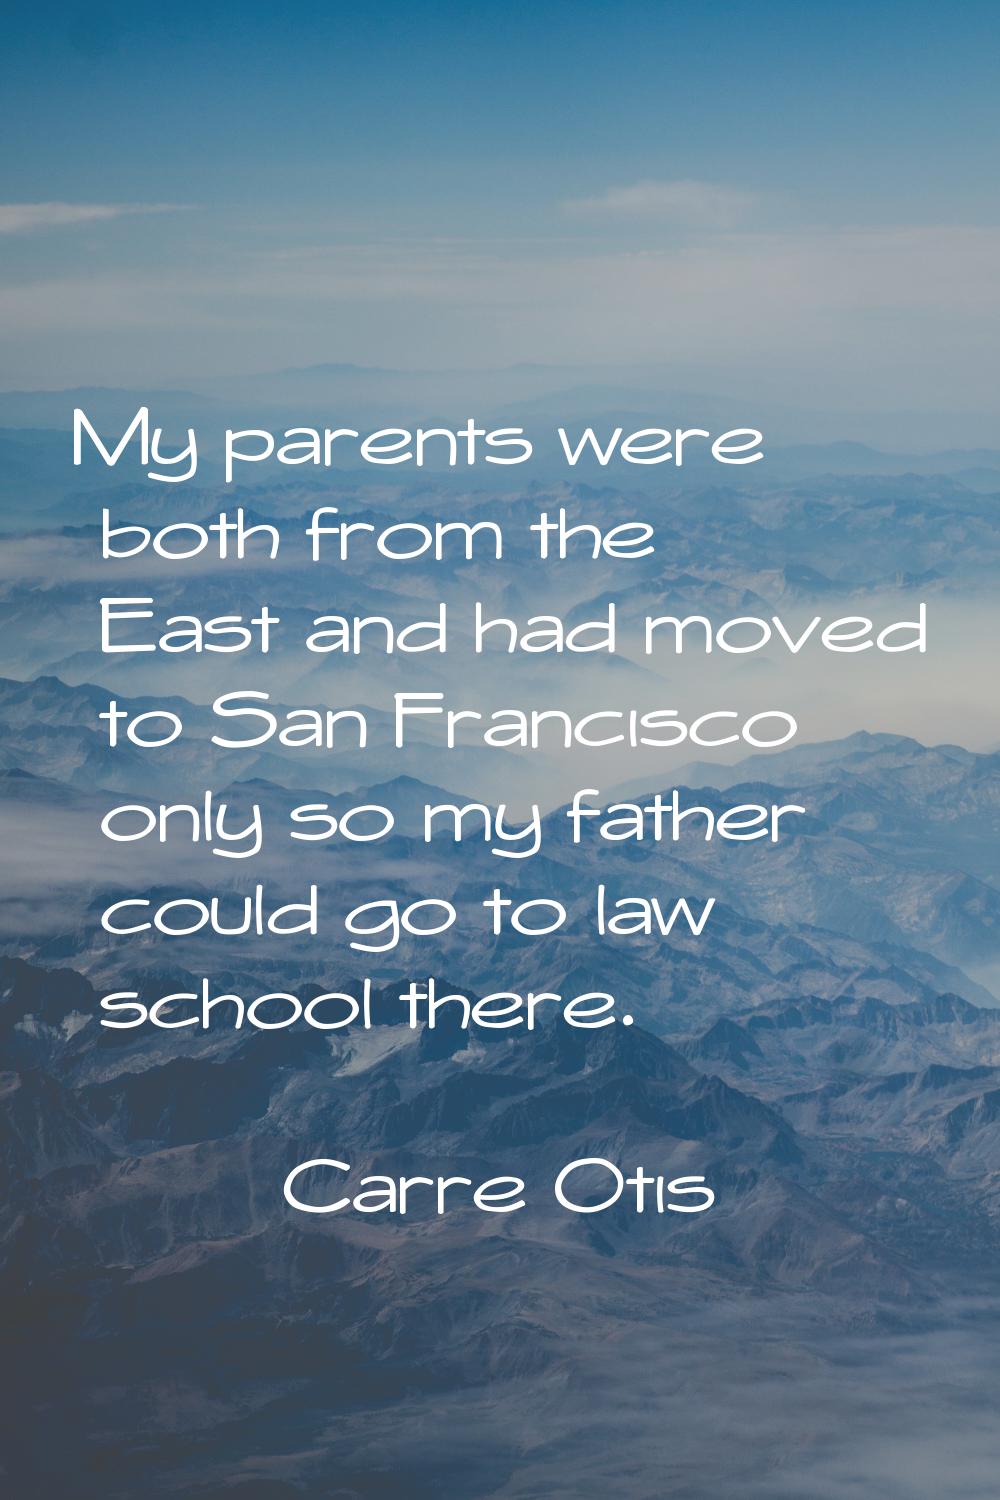 My parents were both from the East and had moved to San Francisco only so my father could go to law